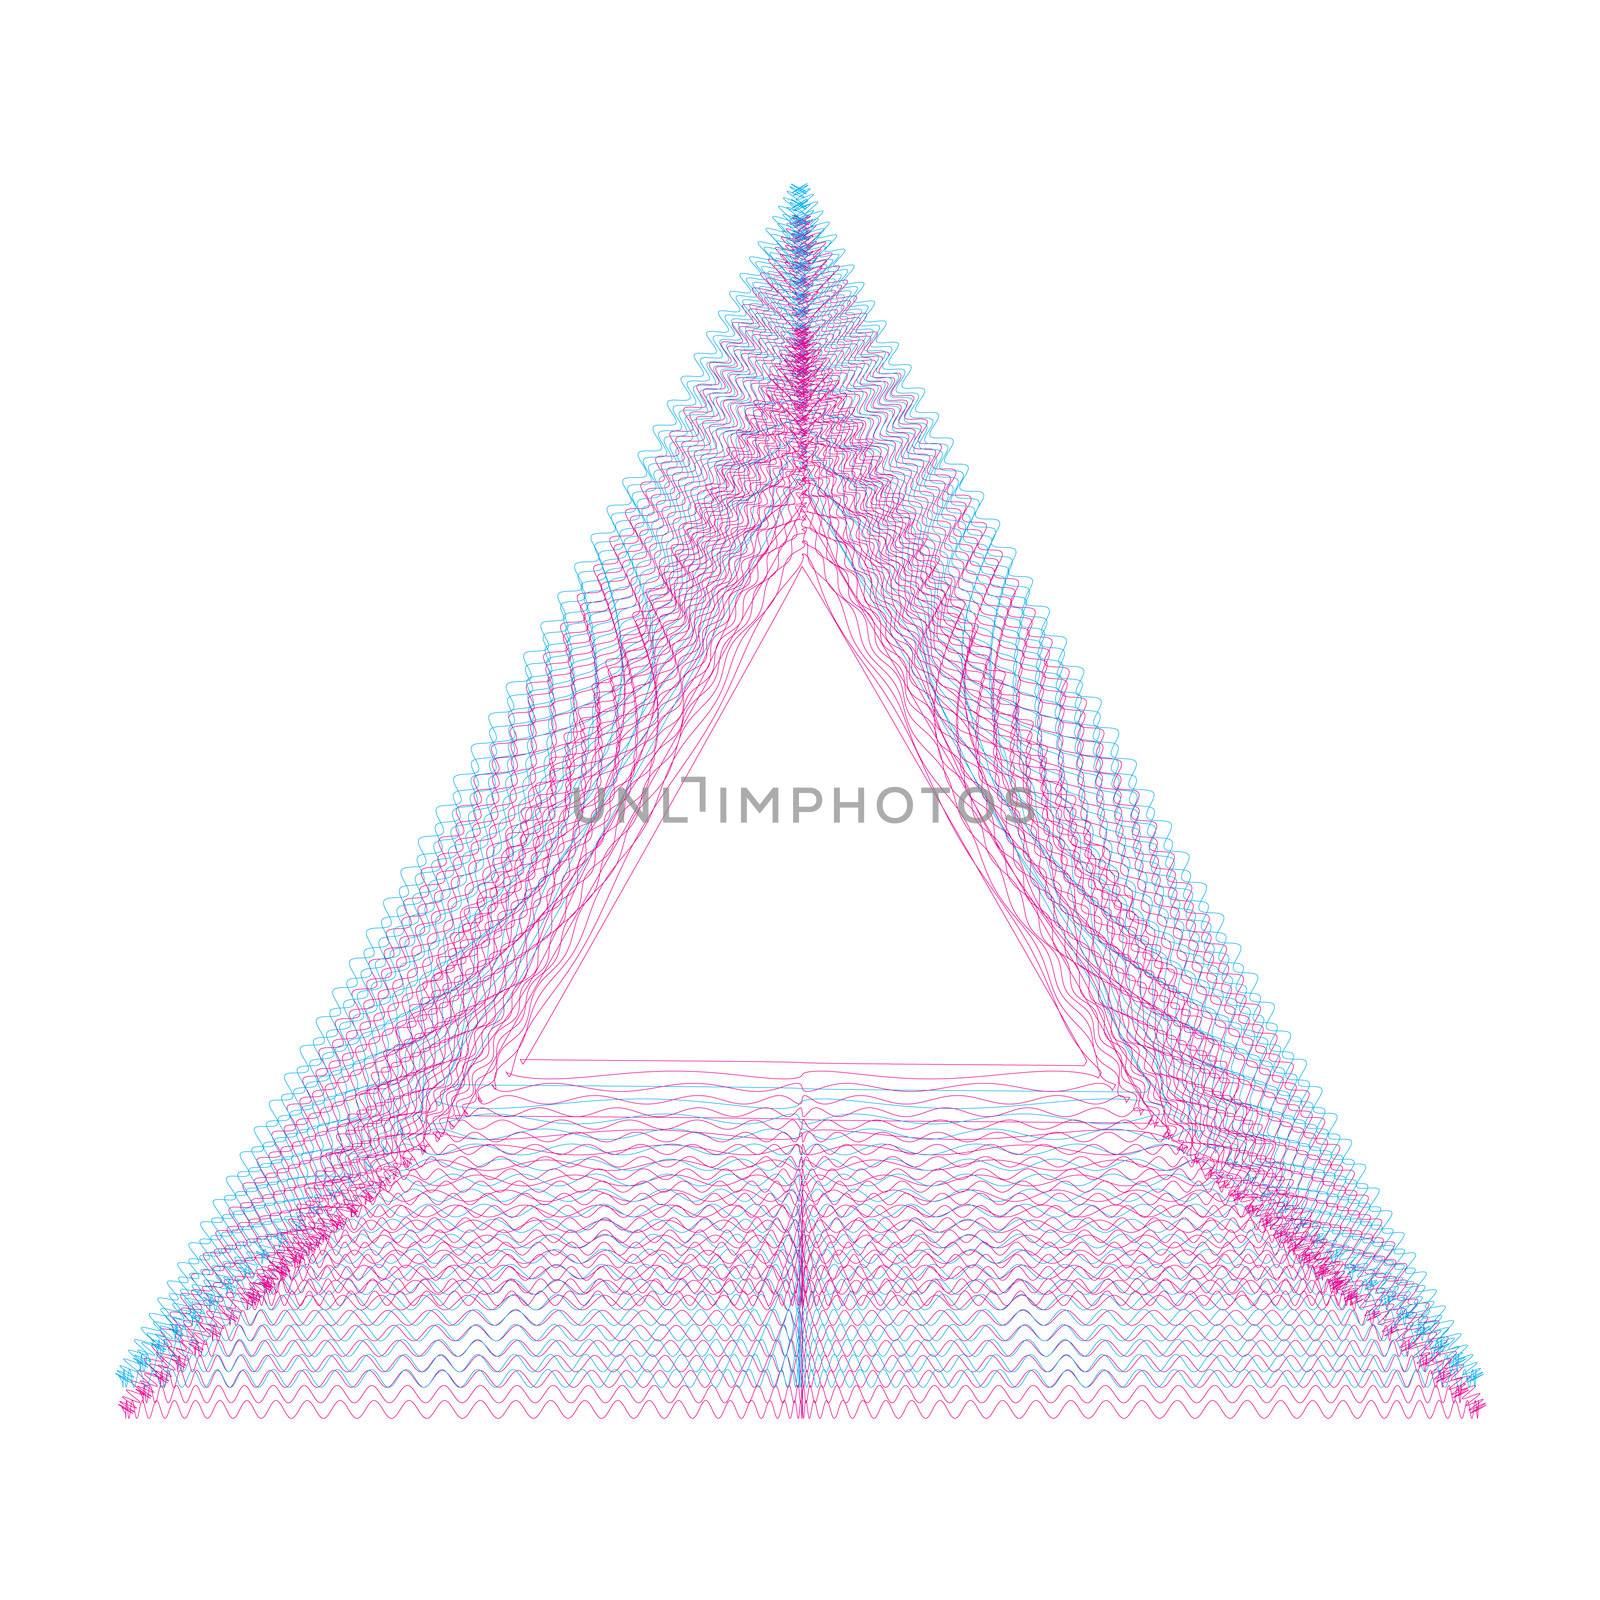 guilloche vector elements by jeremywhat